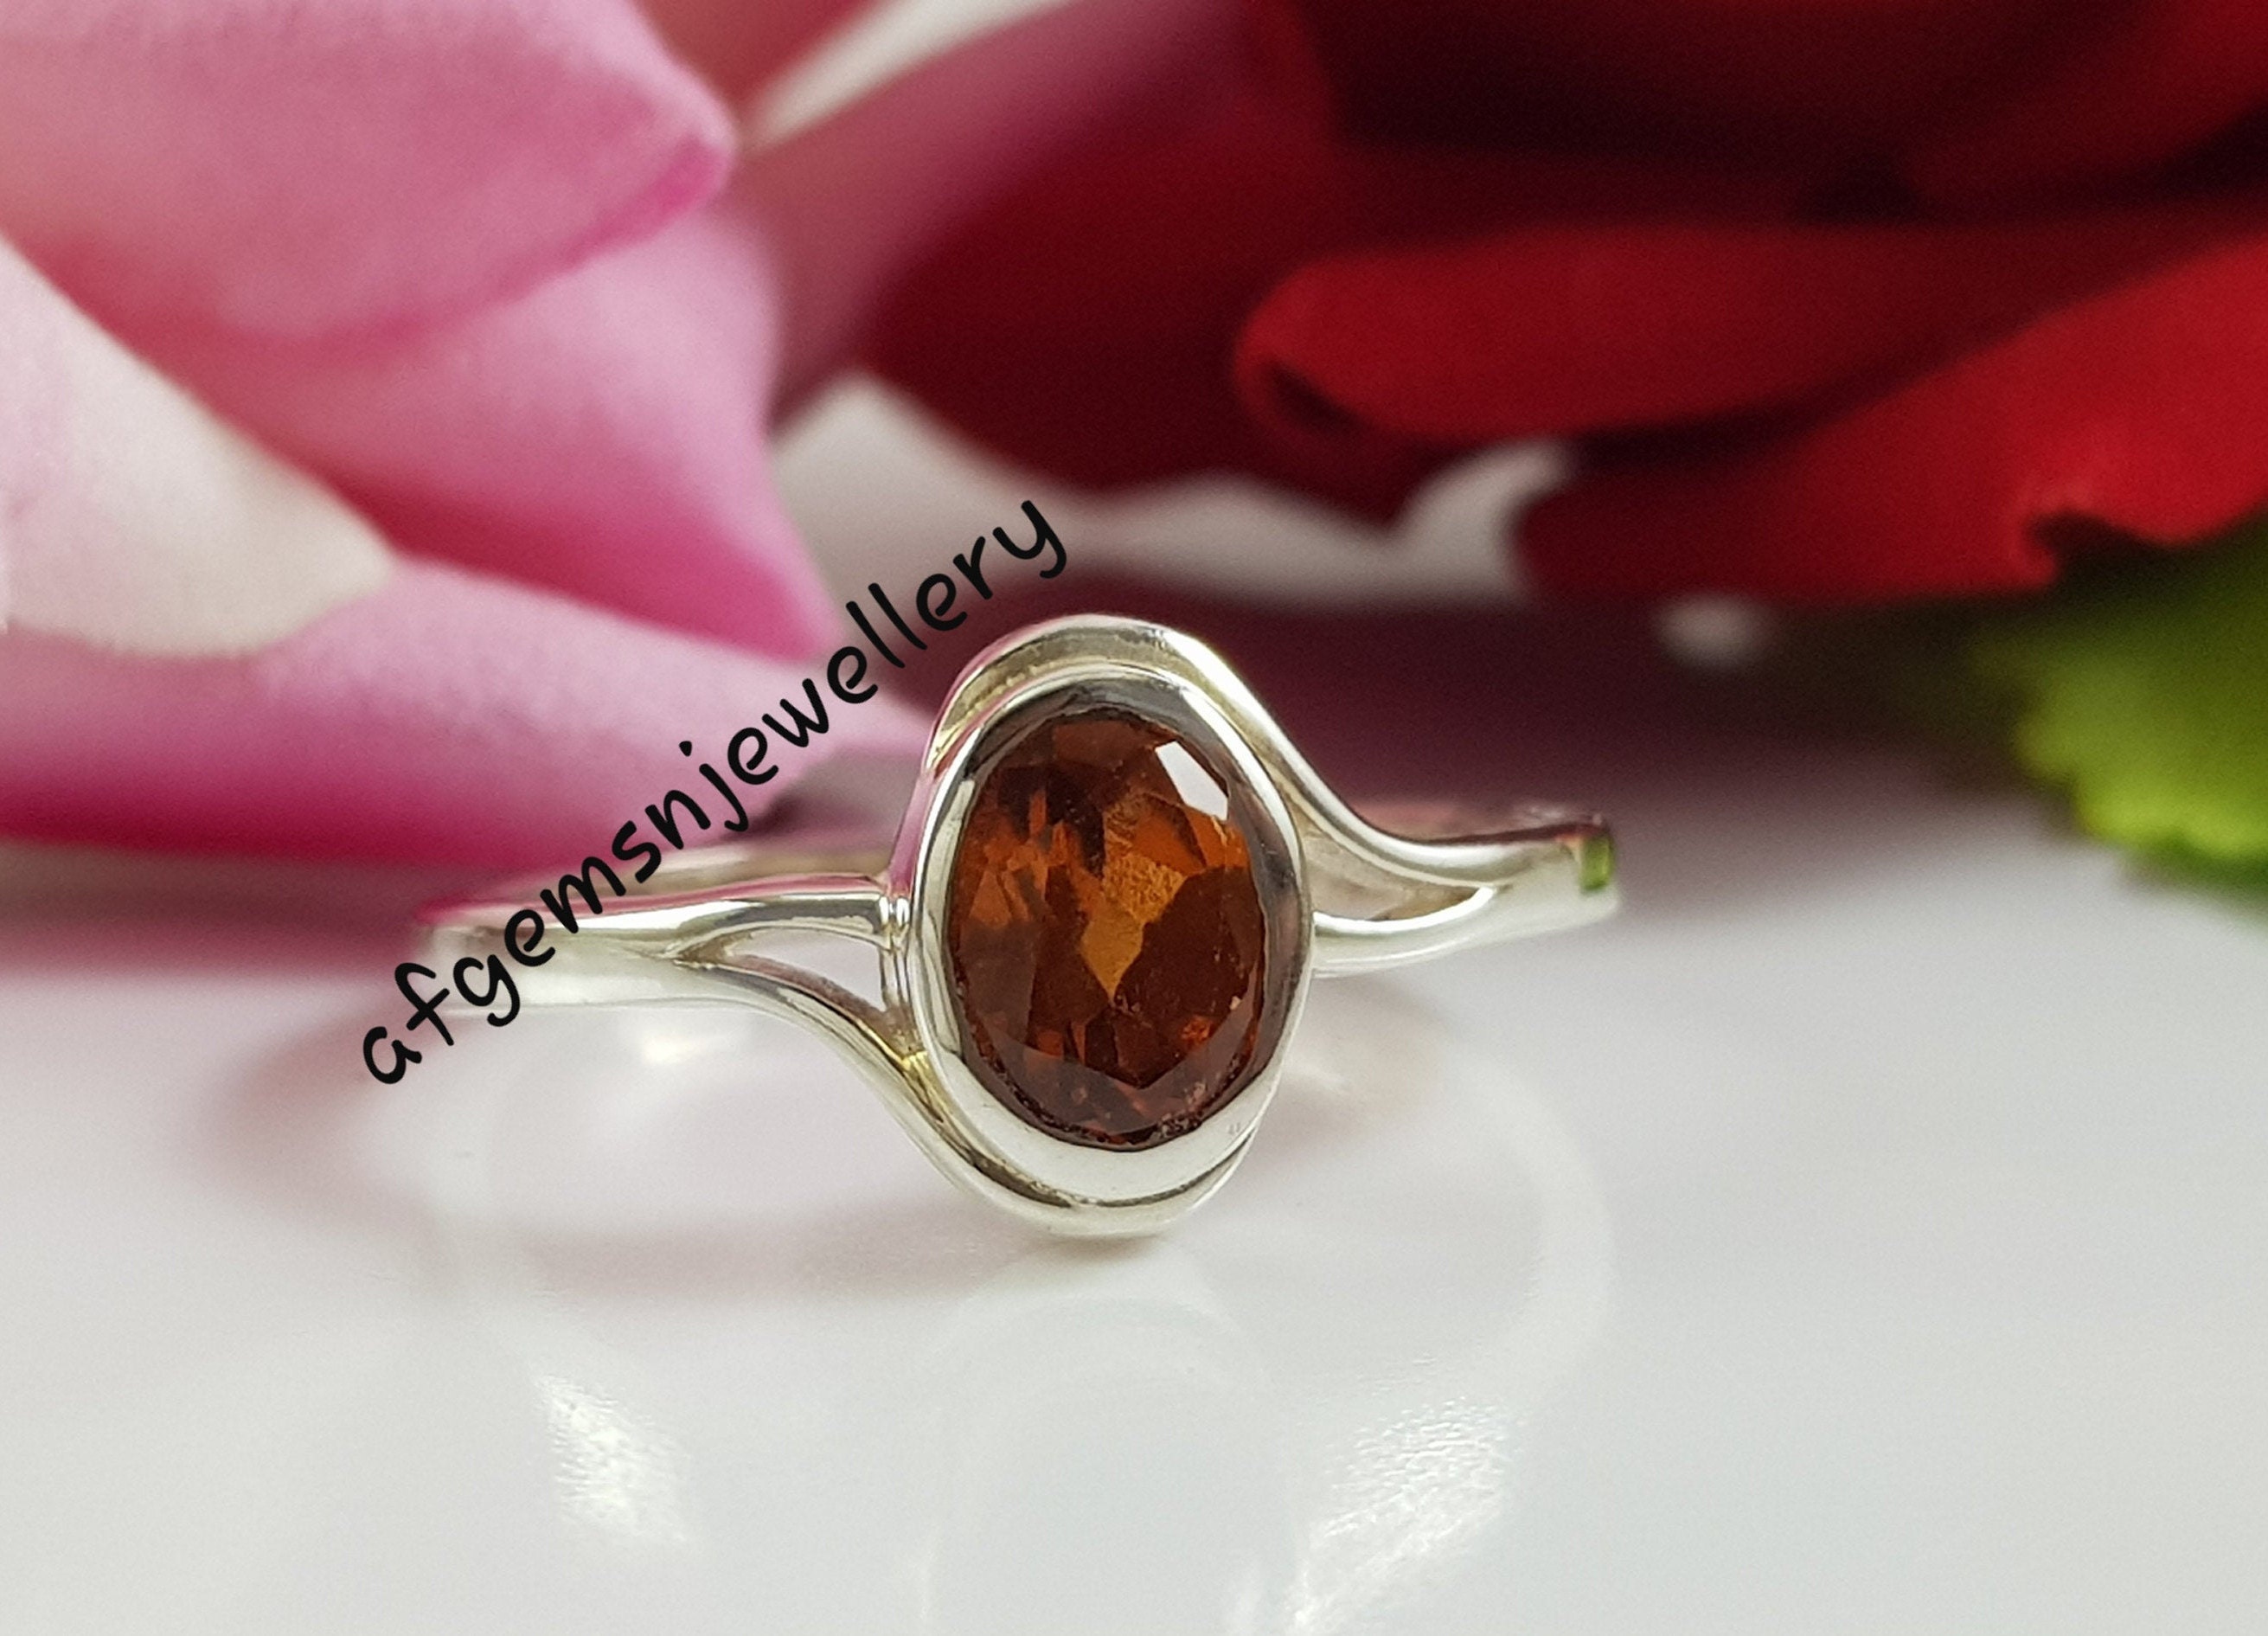 Hessonite(Gomed)Ring 2 carat Hessonite(Gomed)stone Ring by Ratan Bazaar:  Buy Hessonite(Gomed)Ring 2 carat Hessonite(Gomed)stone Ring by Ratan Bazaar  Online in India on Snapdeal